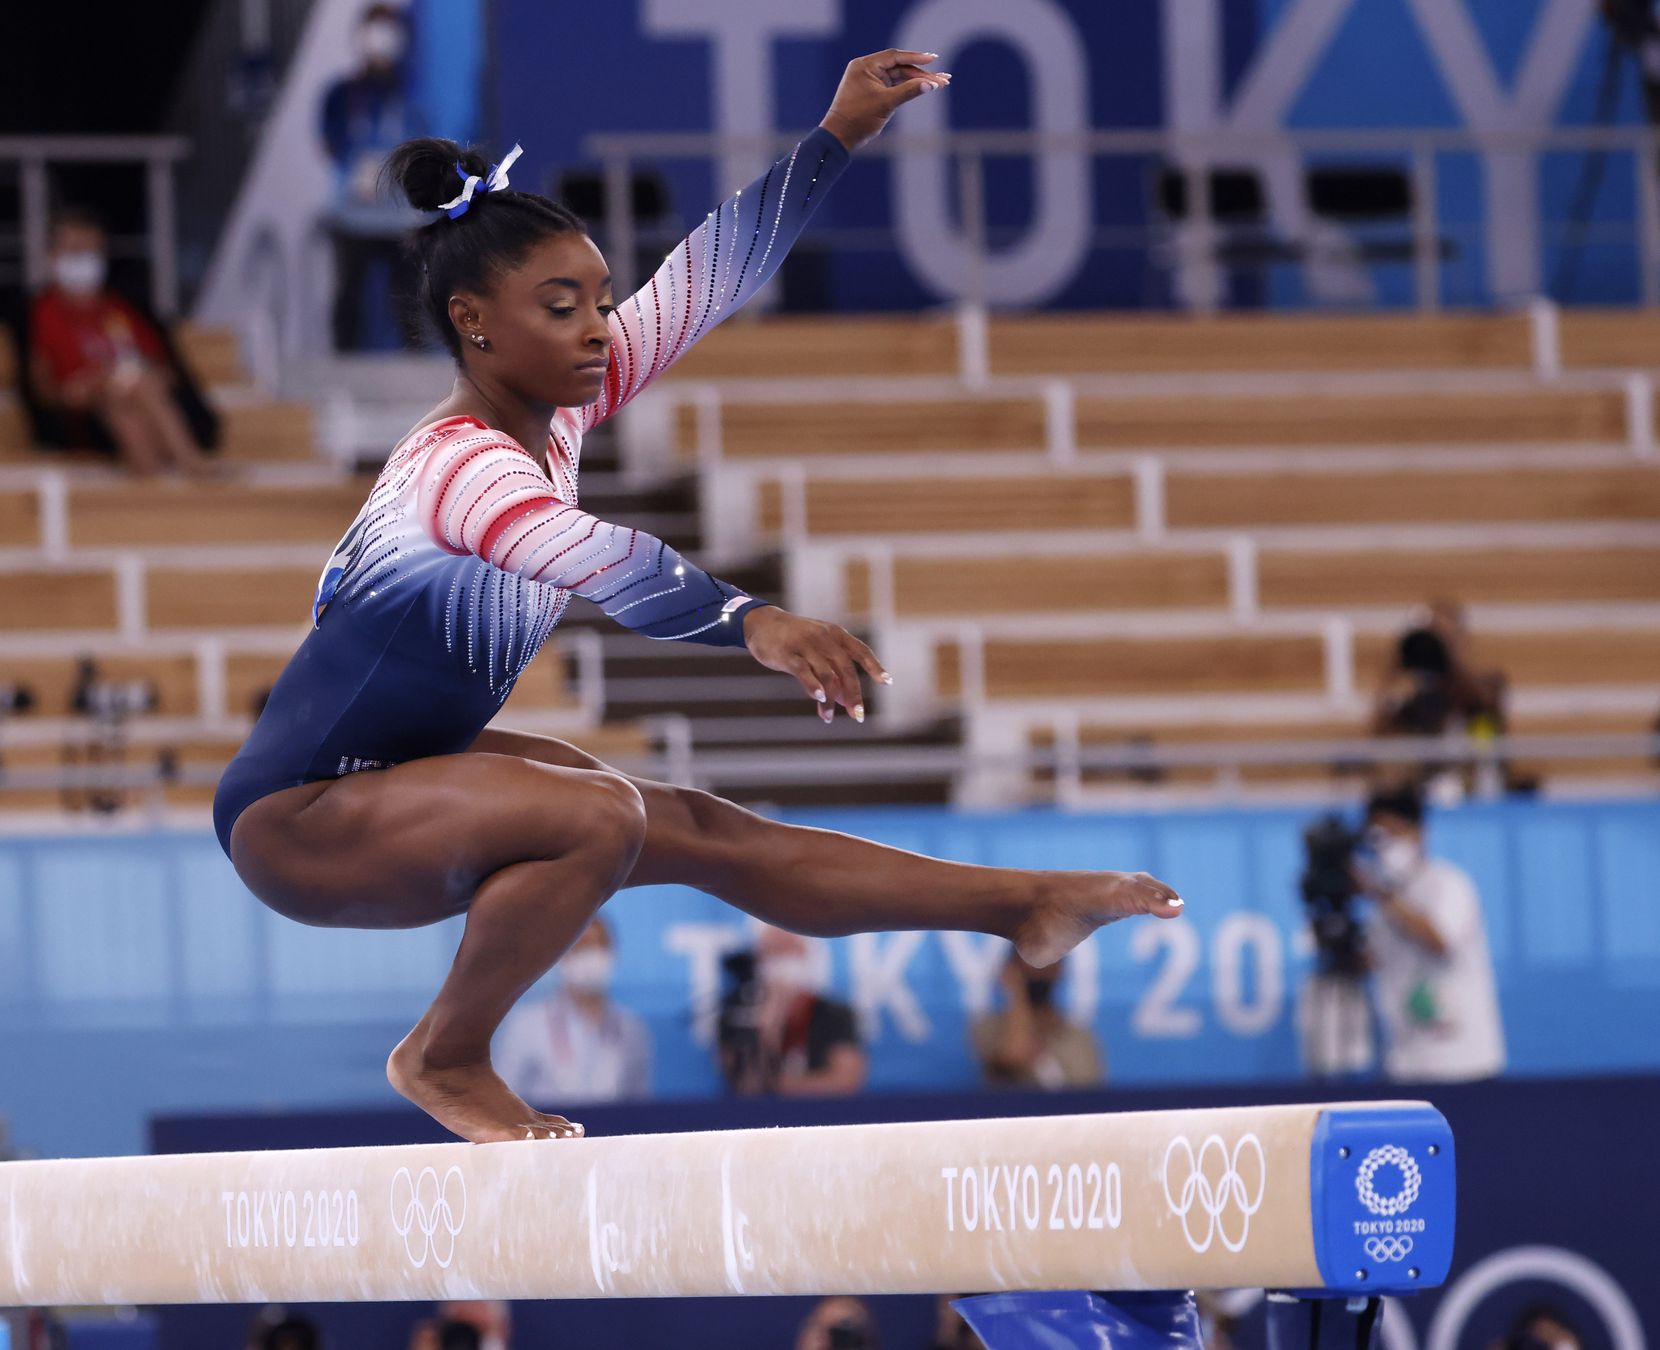 USA’s Simone Biles before competes in the women’s balance beam final at the postponed 2020 Tokyo Olympics at Ariake Gymnastics Centre, on Tuesday, August 3, 2021, in Tokyo, Japan. Biles placed third in the event, earning a bronze medal. (Vernon Bryant/The Dallas Morning News)